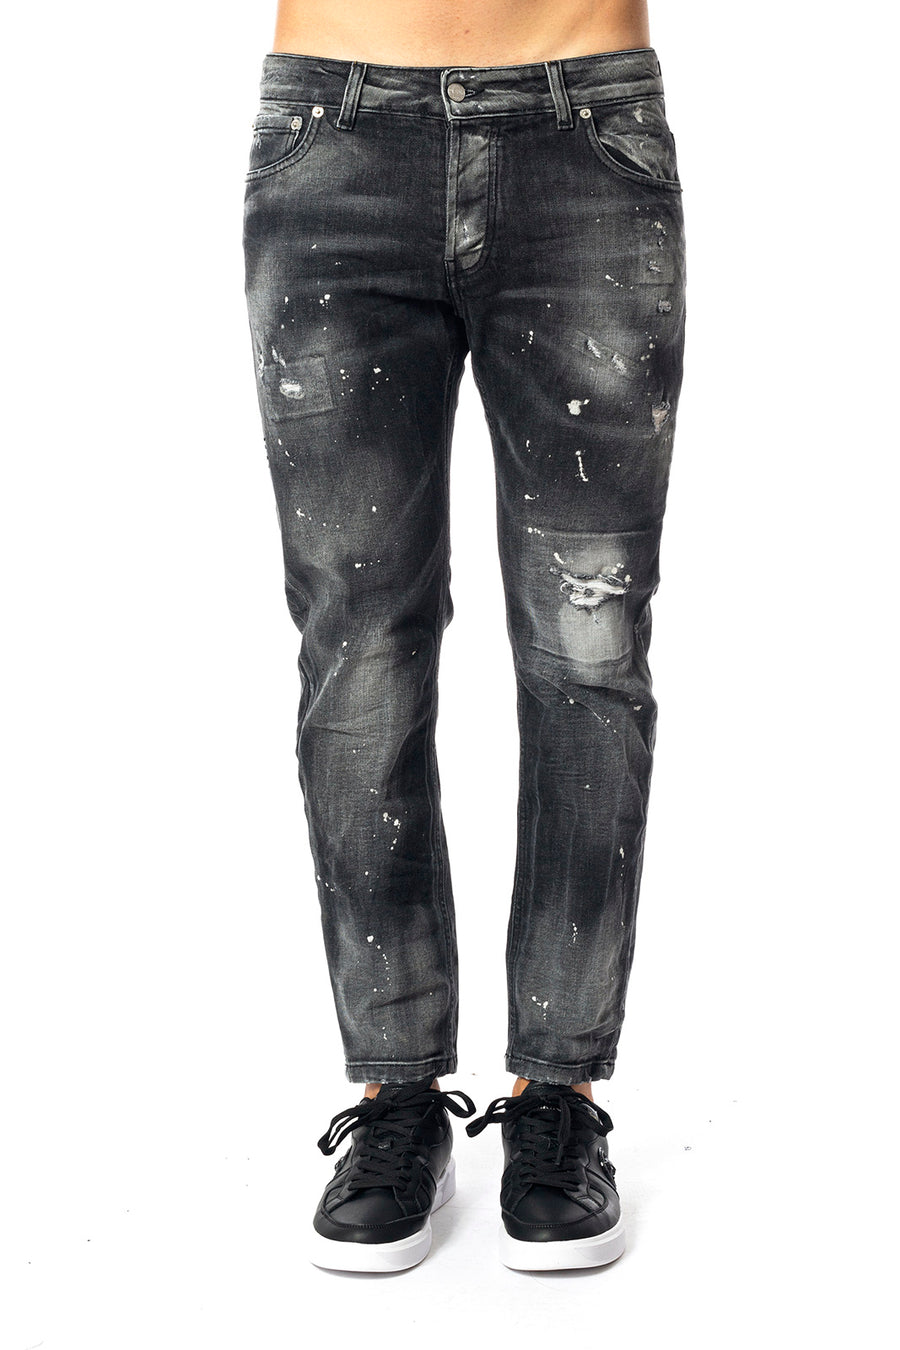 JEANS LABELROUTE WILLY A558 PRIMO